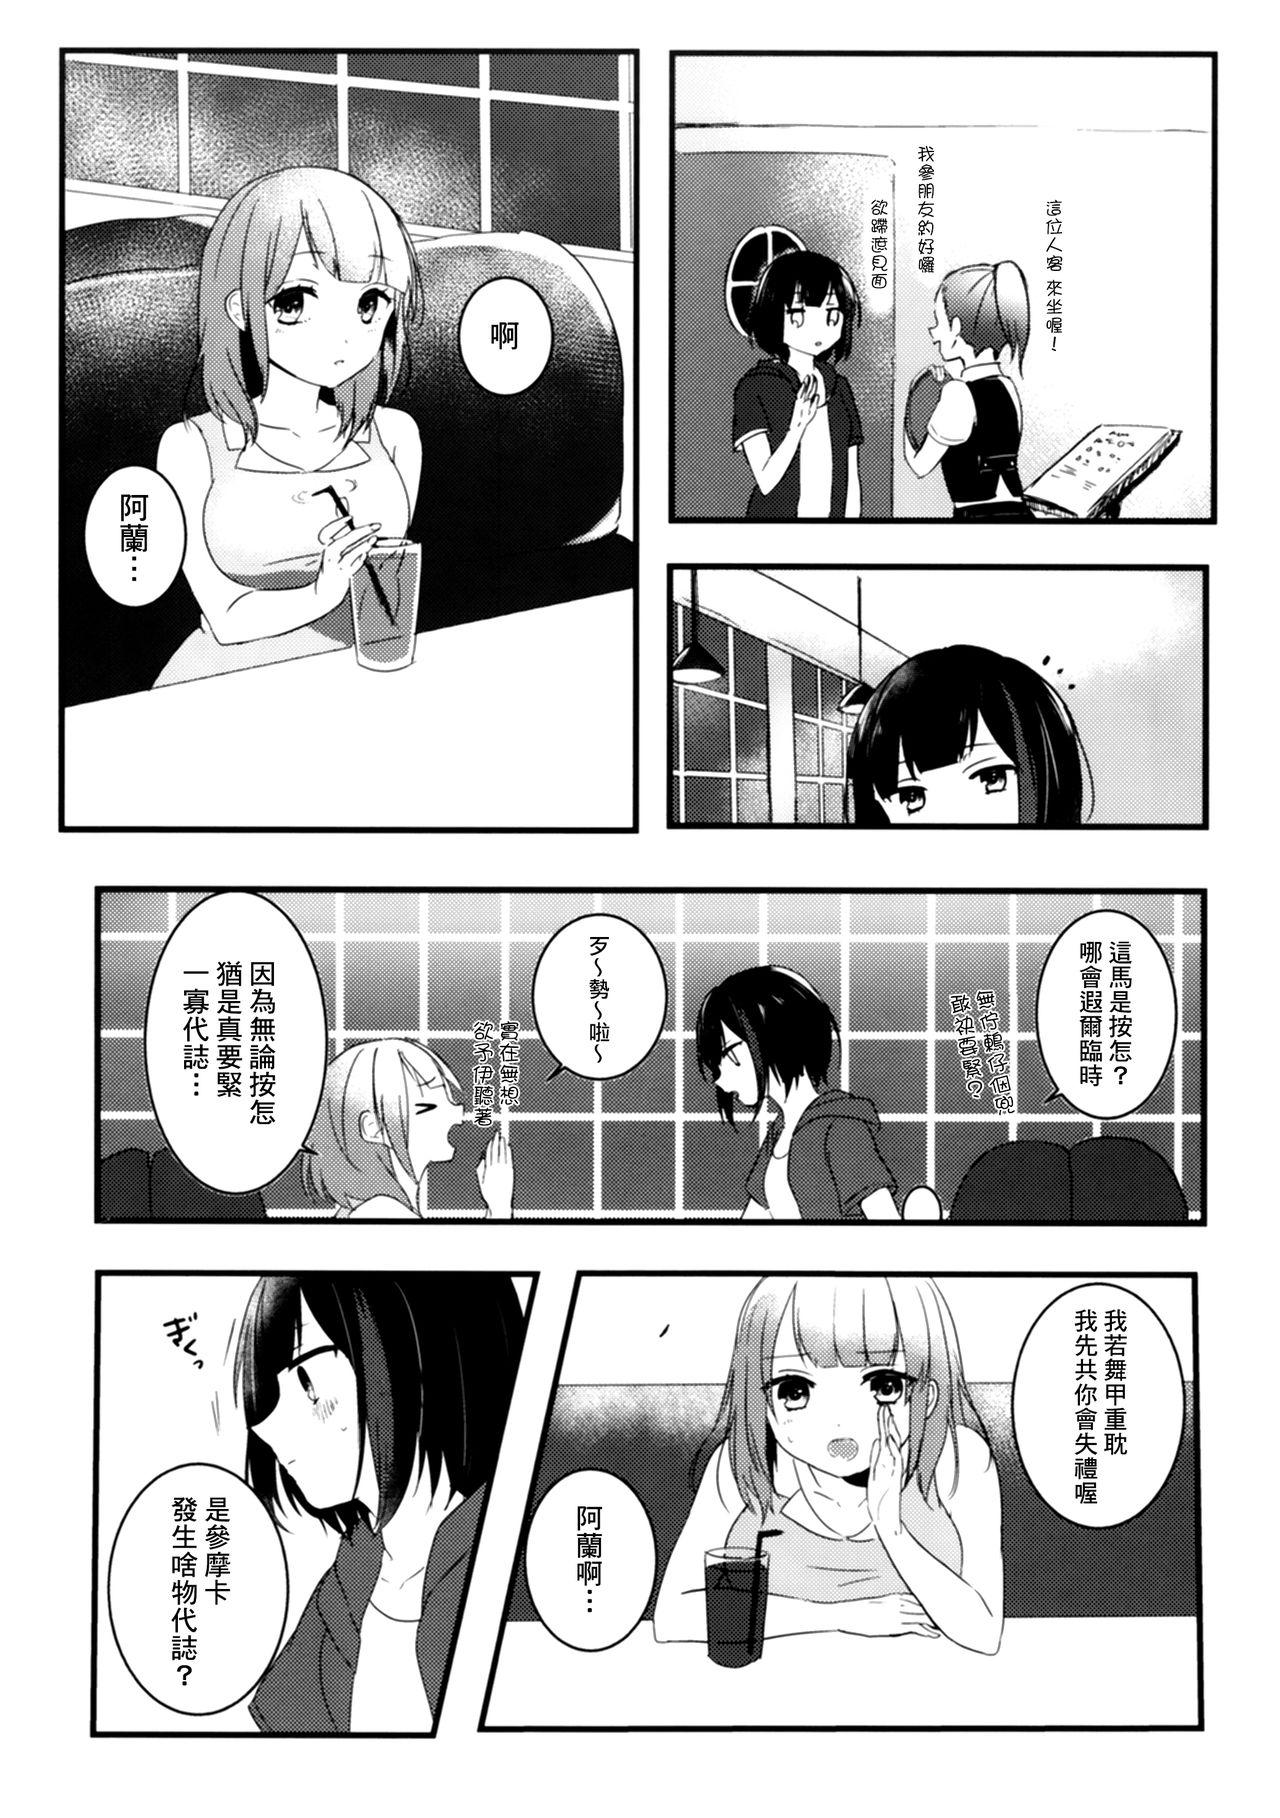 Perra Secret relationship - Bang dream Pussy Licking - Page 7